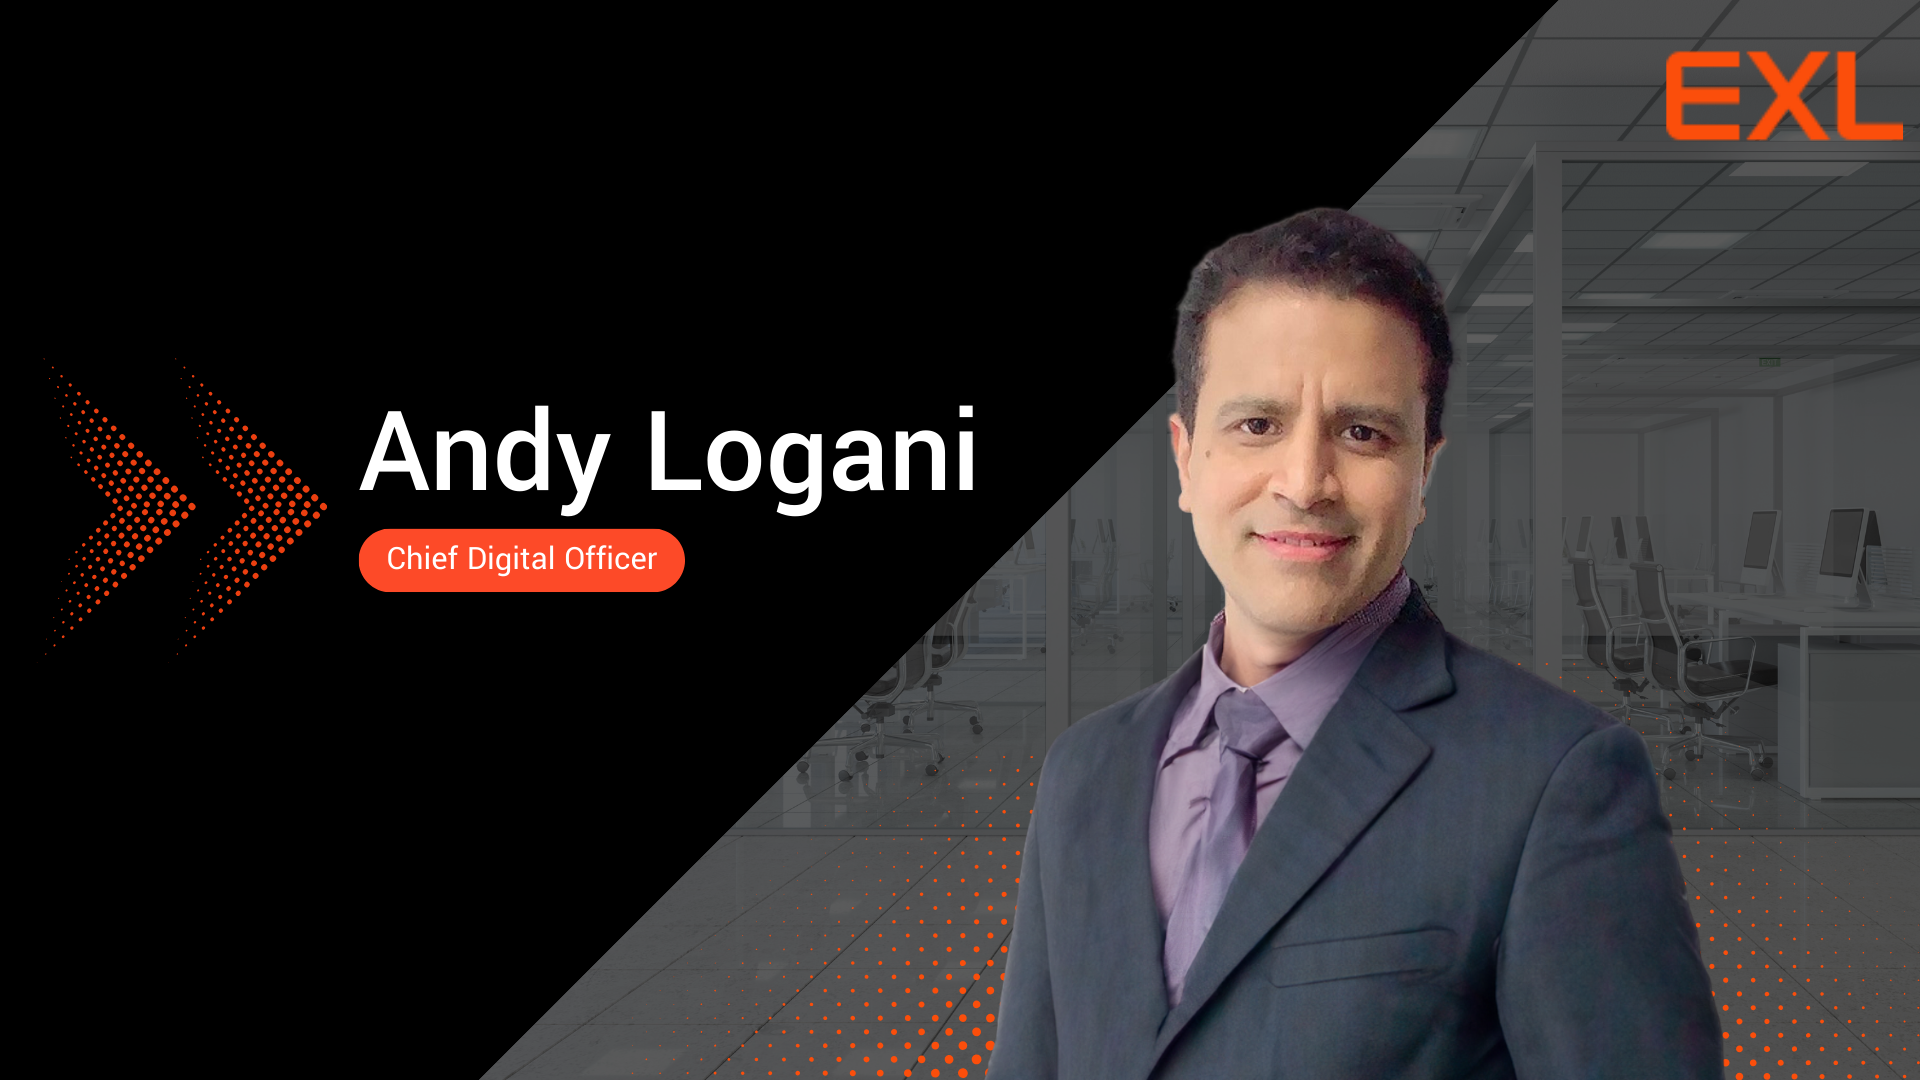 A Glimpse into the Digital Heartbeat of EXL: An Exclusive with Andy Logani